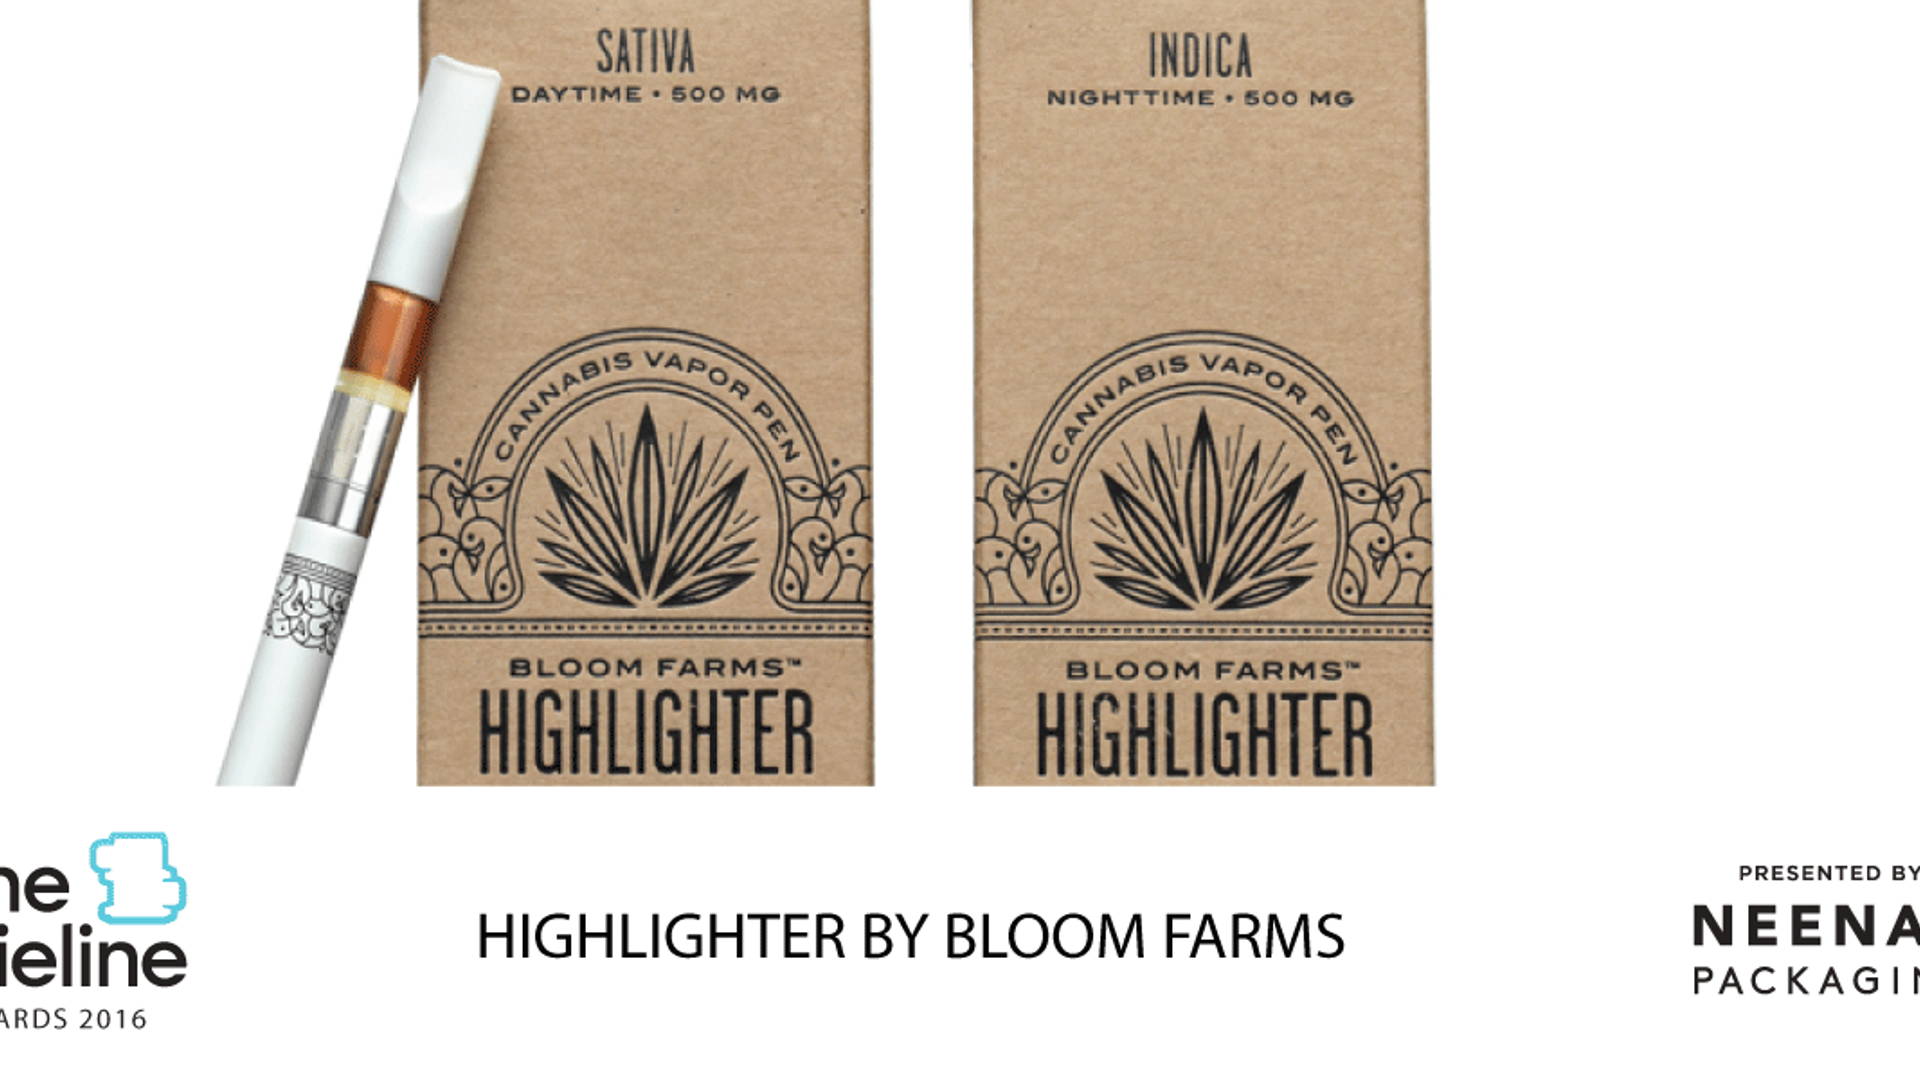 Featured image for The Dieline Awards 2016 Outstanding Achievements: Highlighter by Bloom Farms